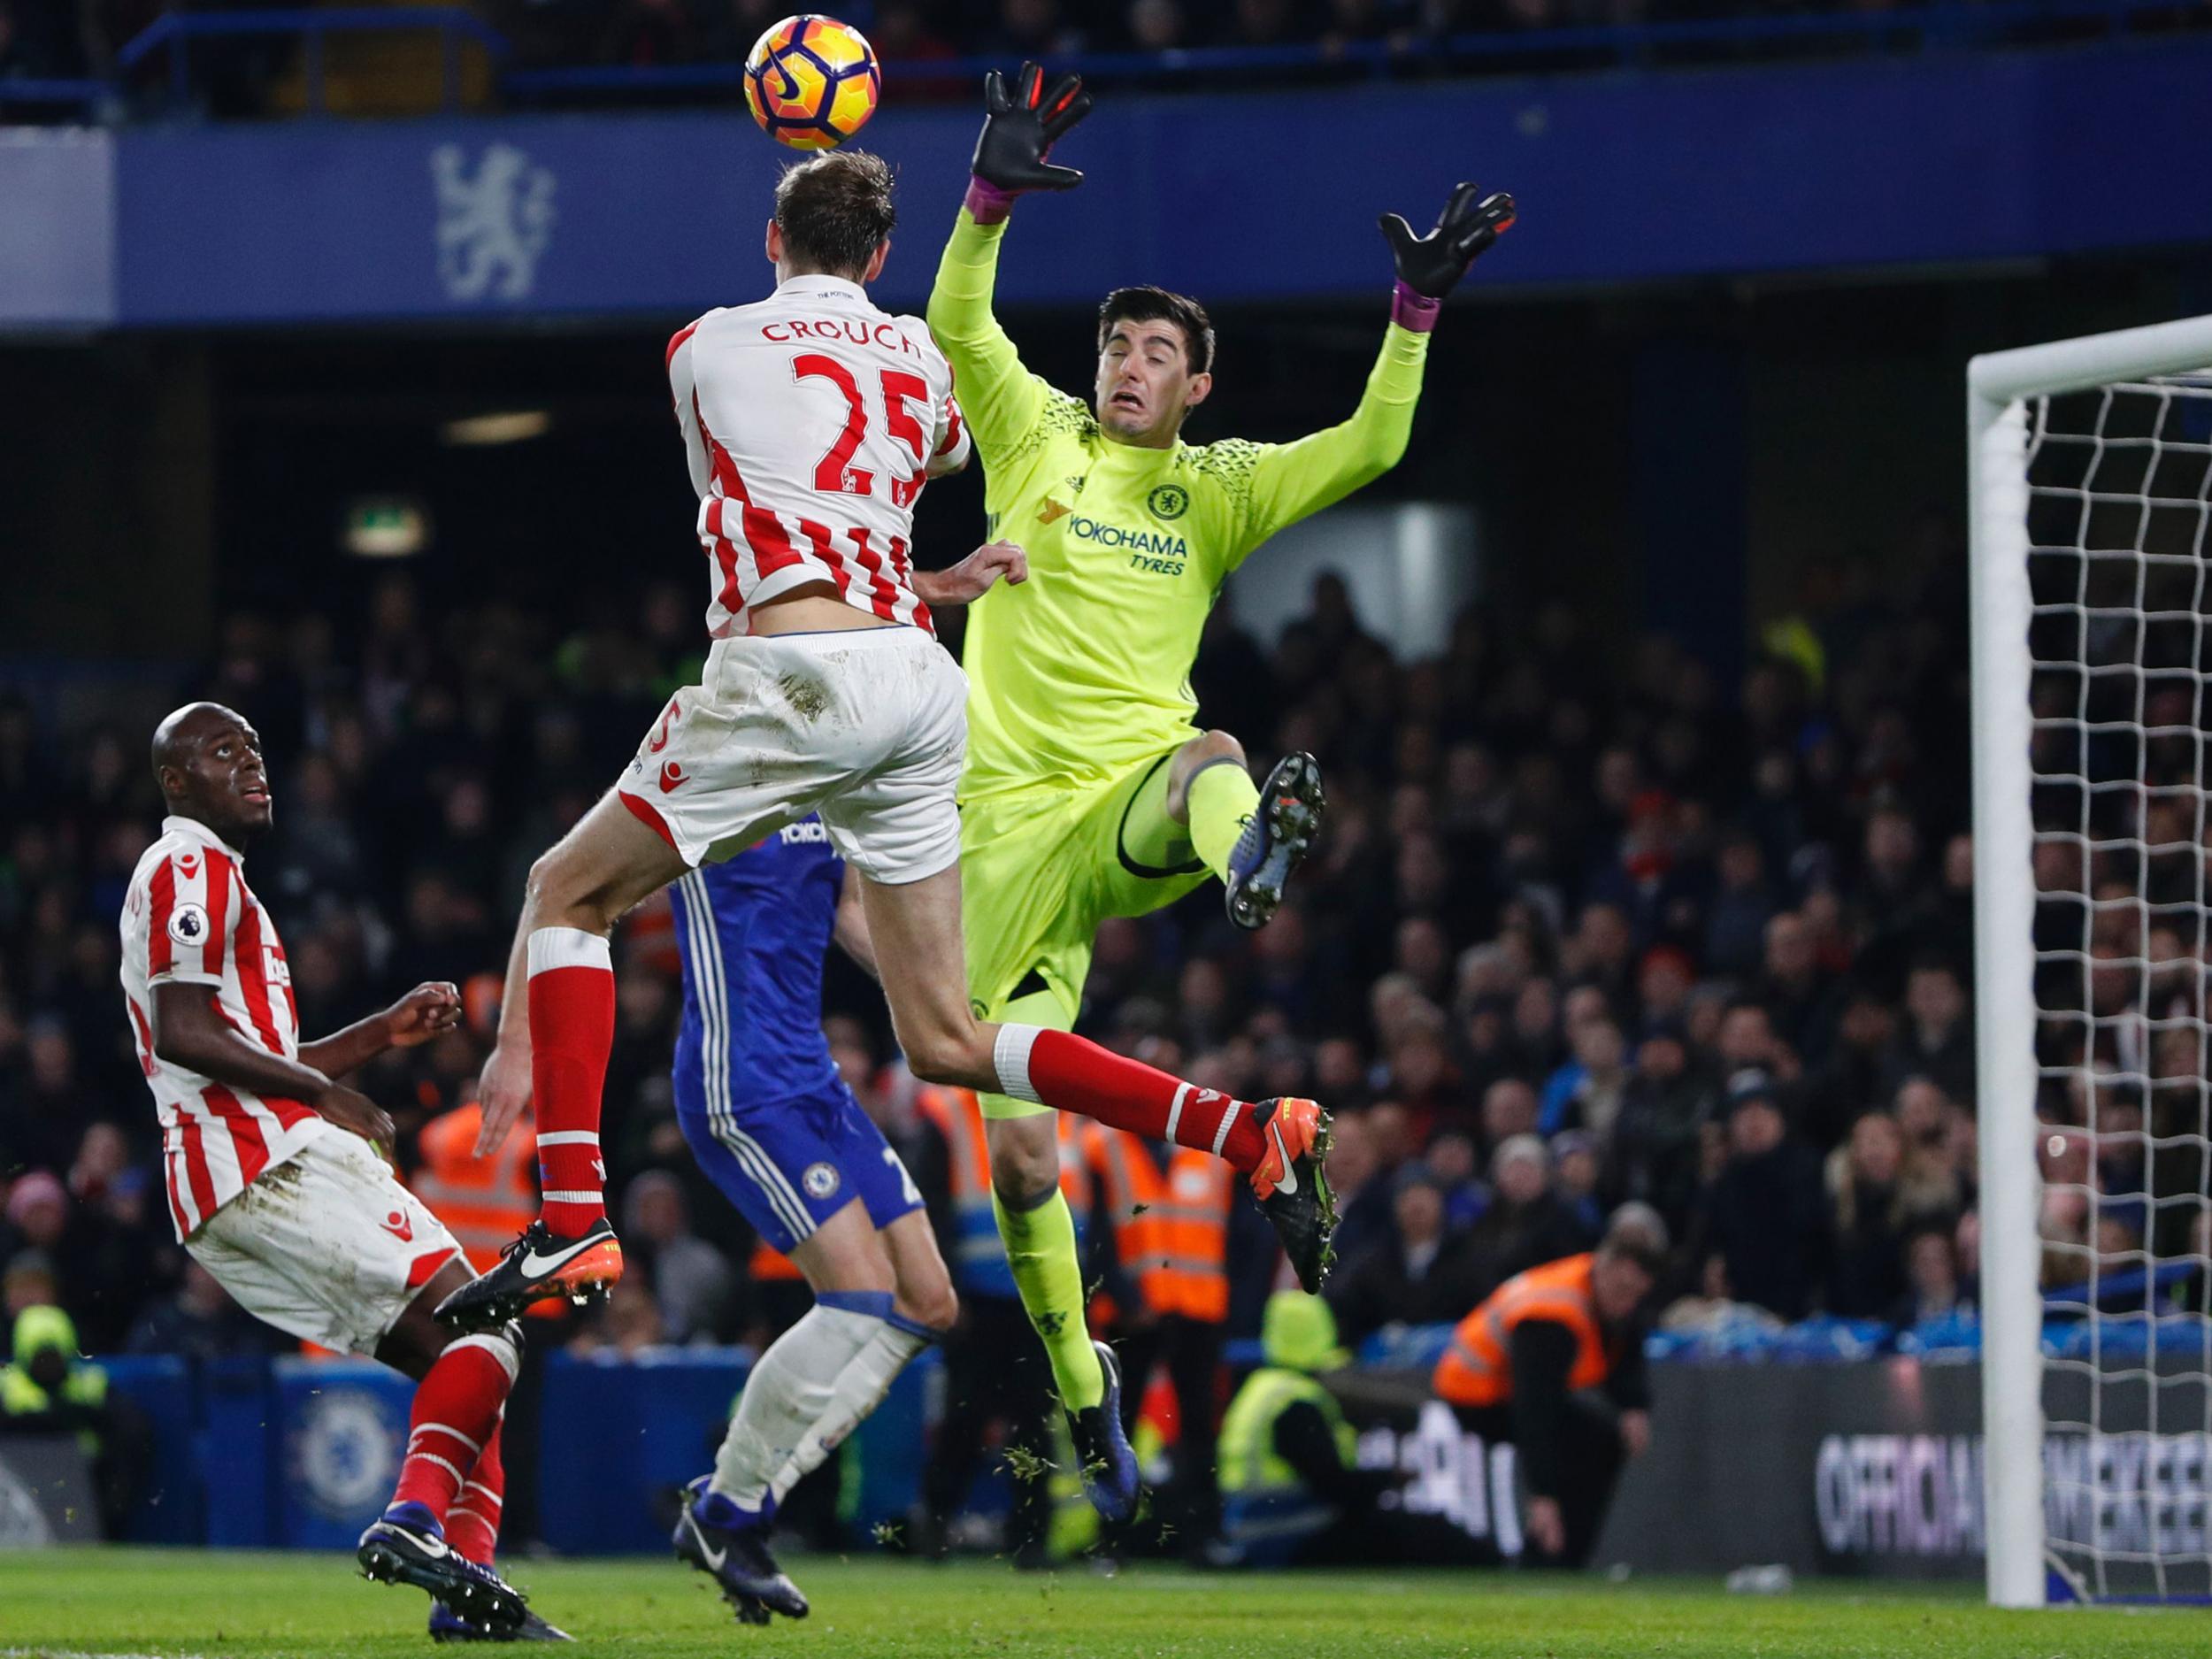 Crouch and Courtois will again go head to head when Stoke entertain Chelsea